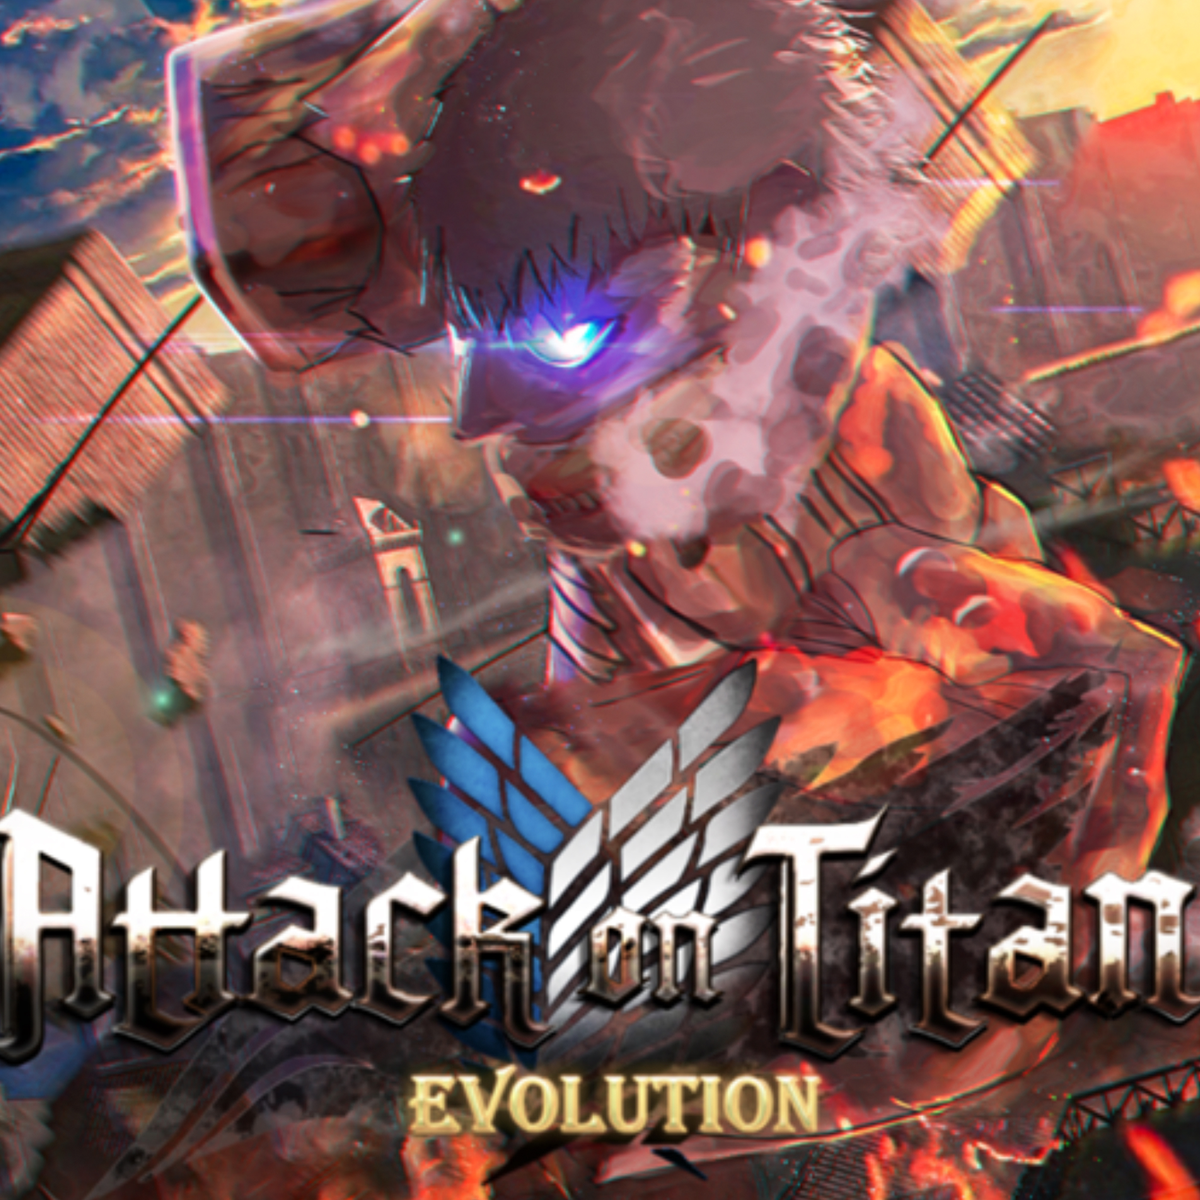 All Roblox Attack on Titan Evolution codes for free Spins, Gold, and more  in December 2023 - Charlie INTEL